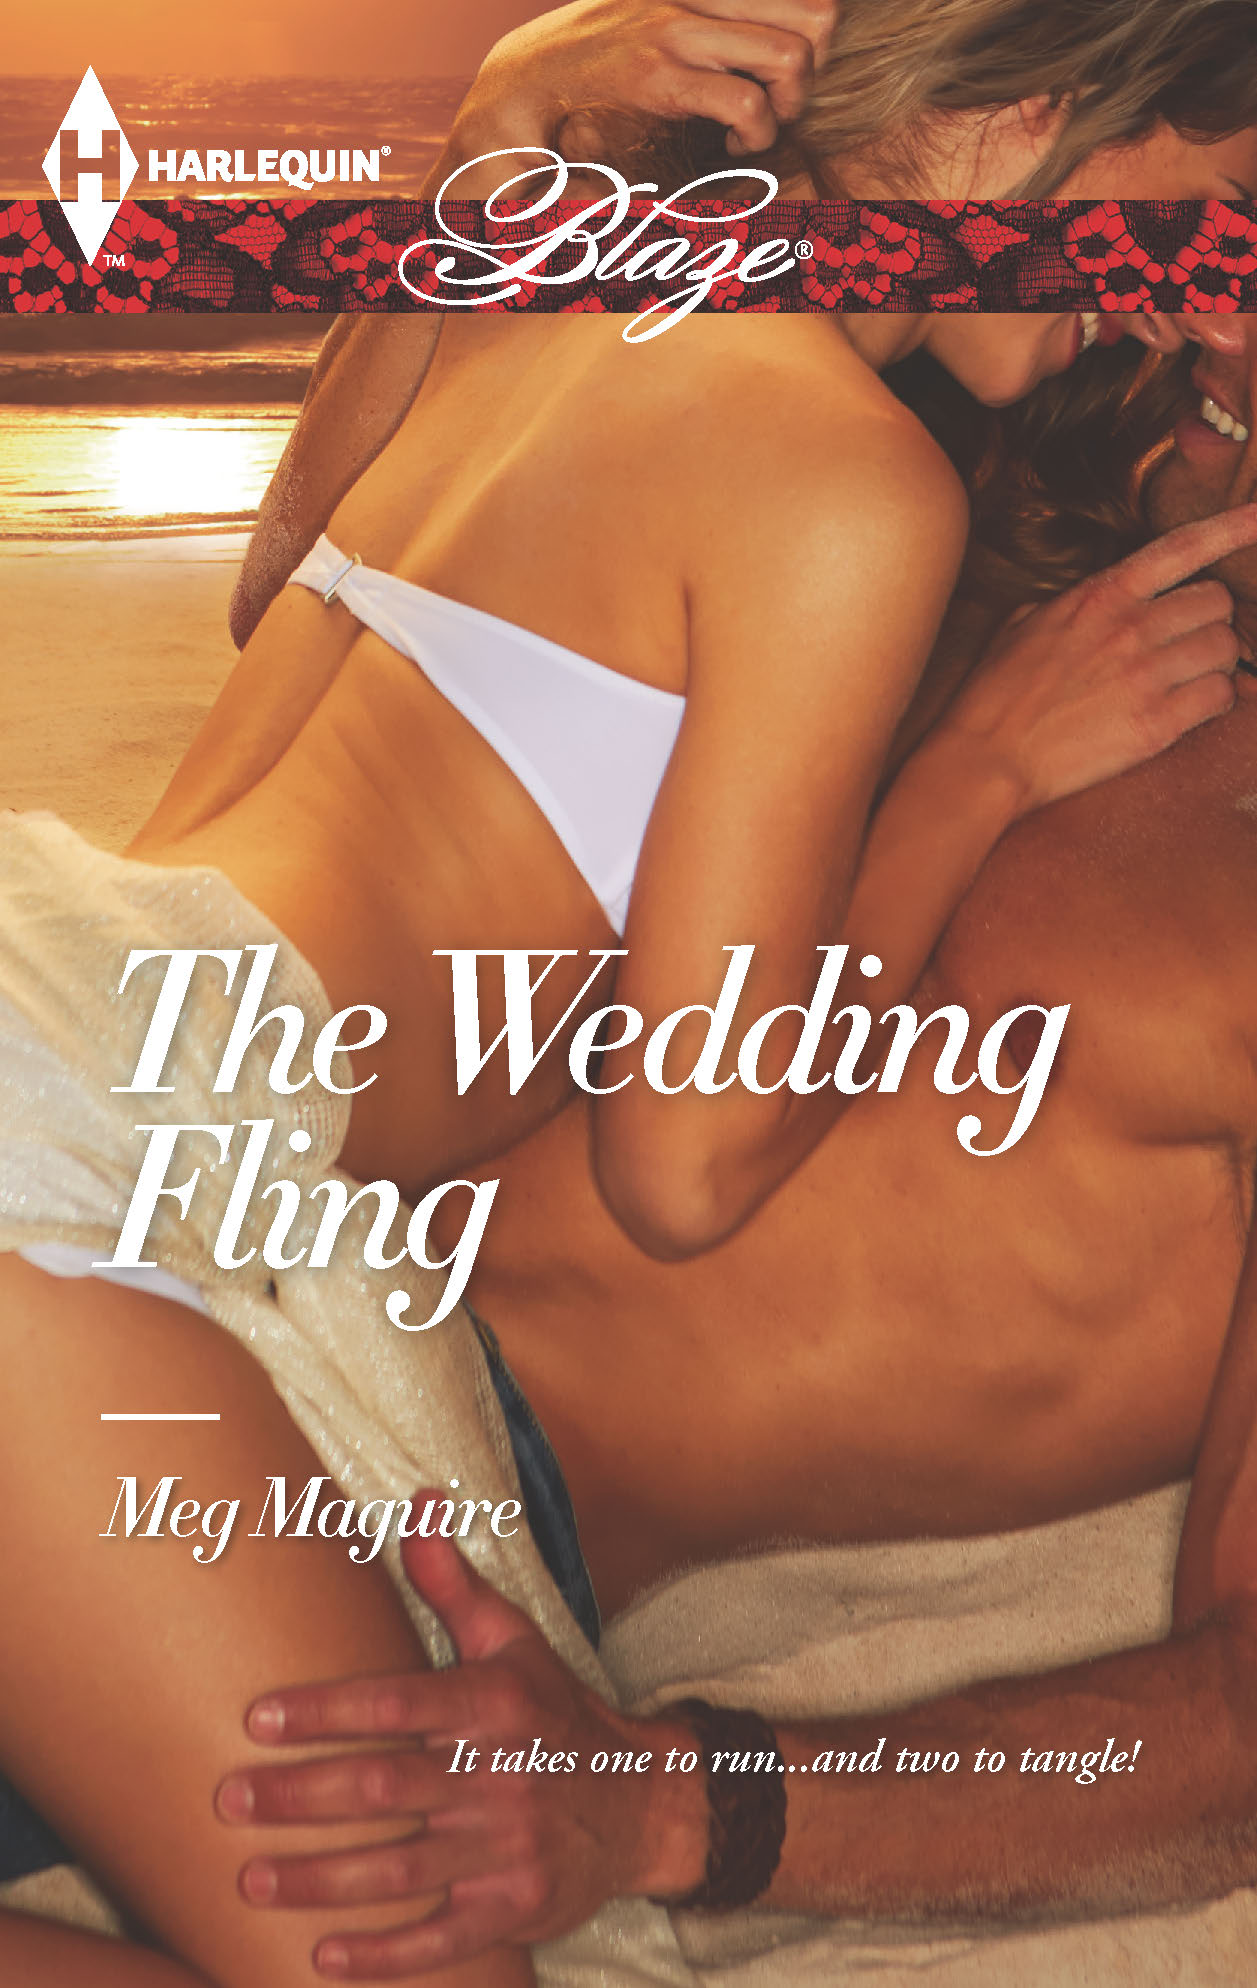 The Wedding Fling by Meg Maguire